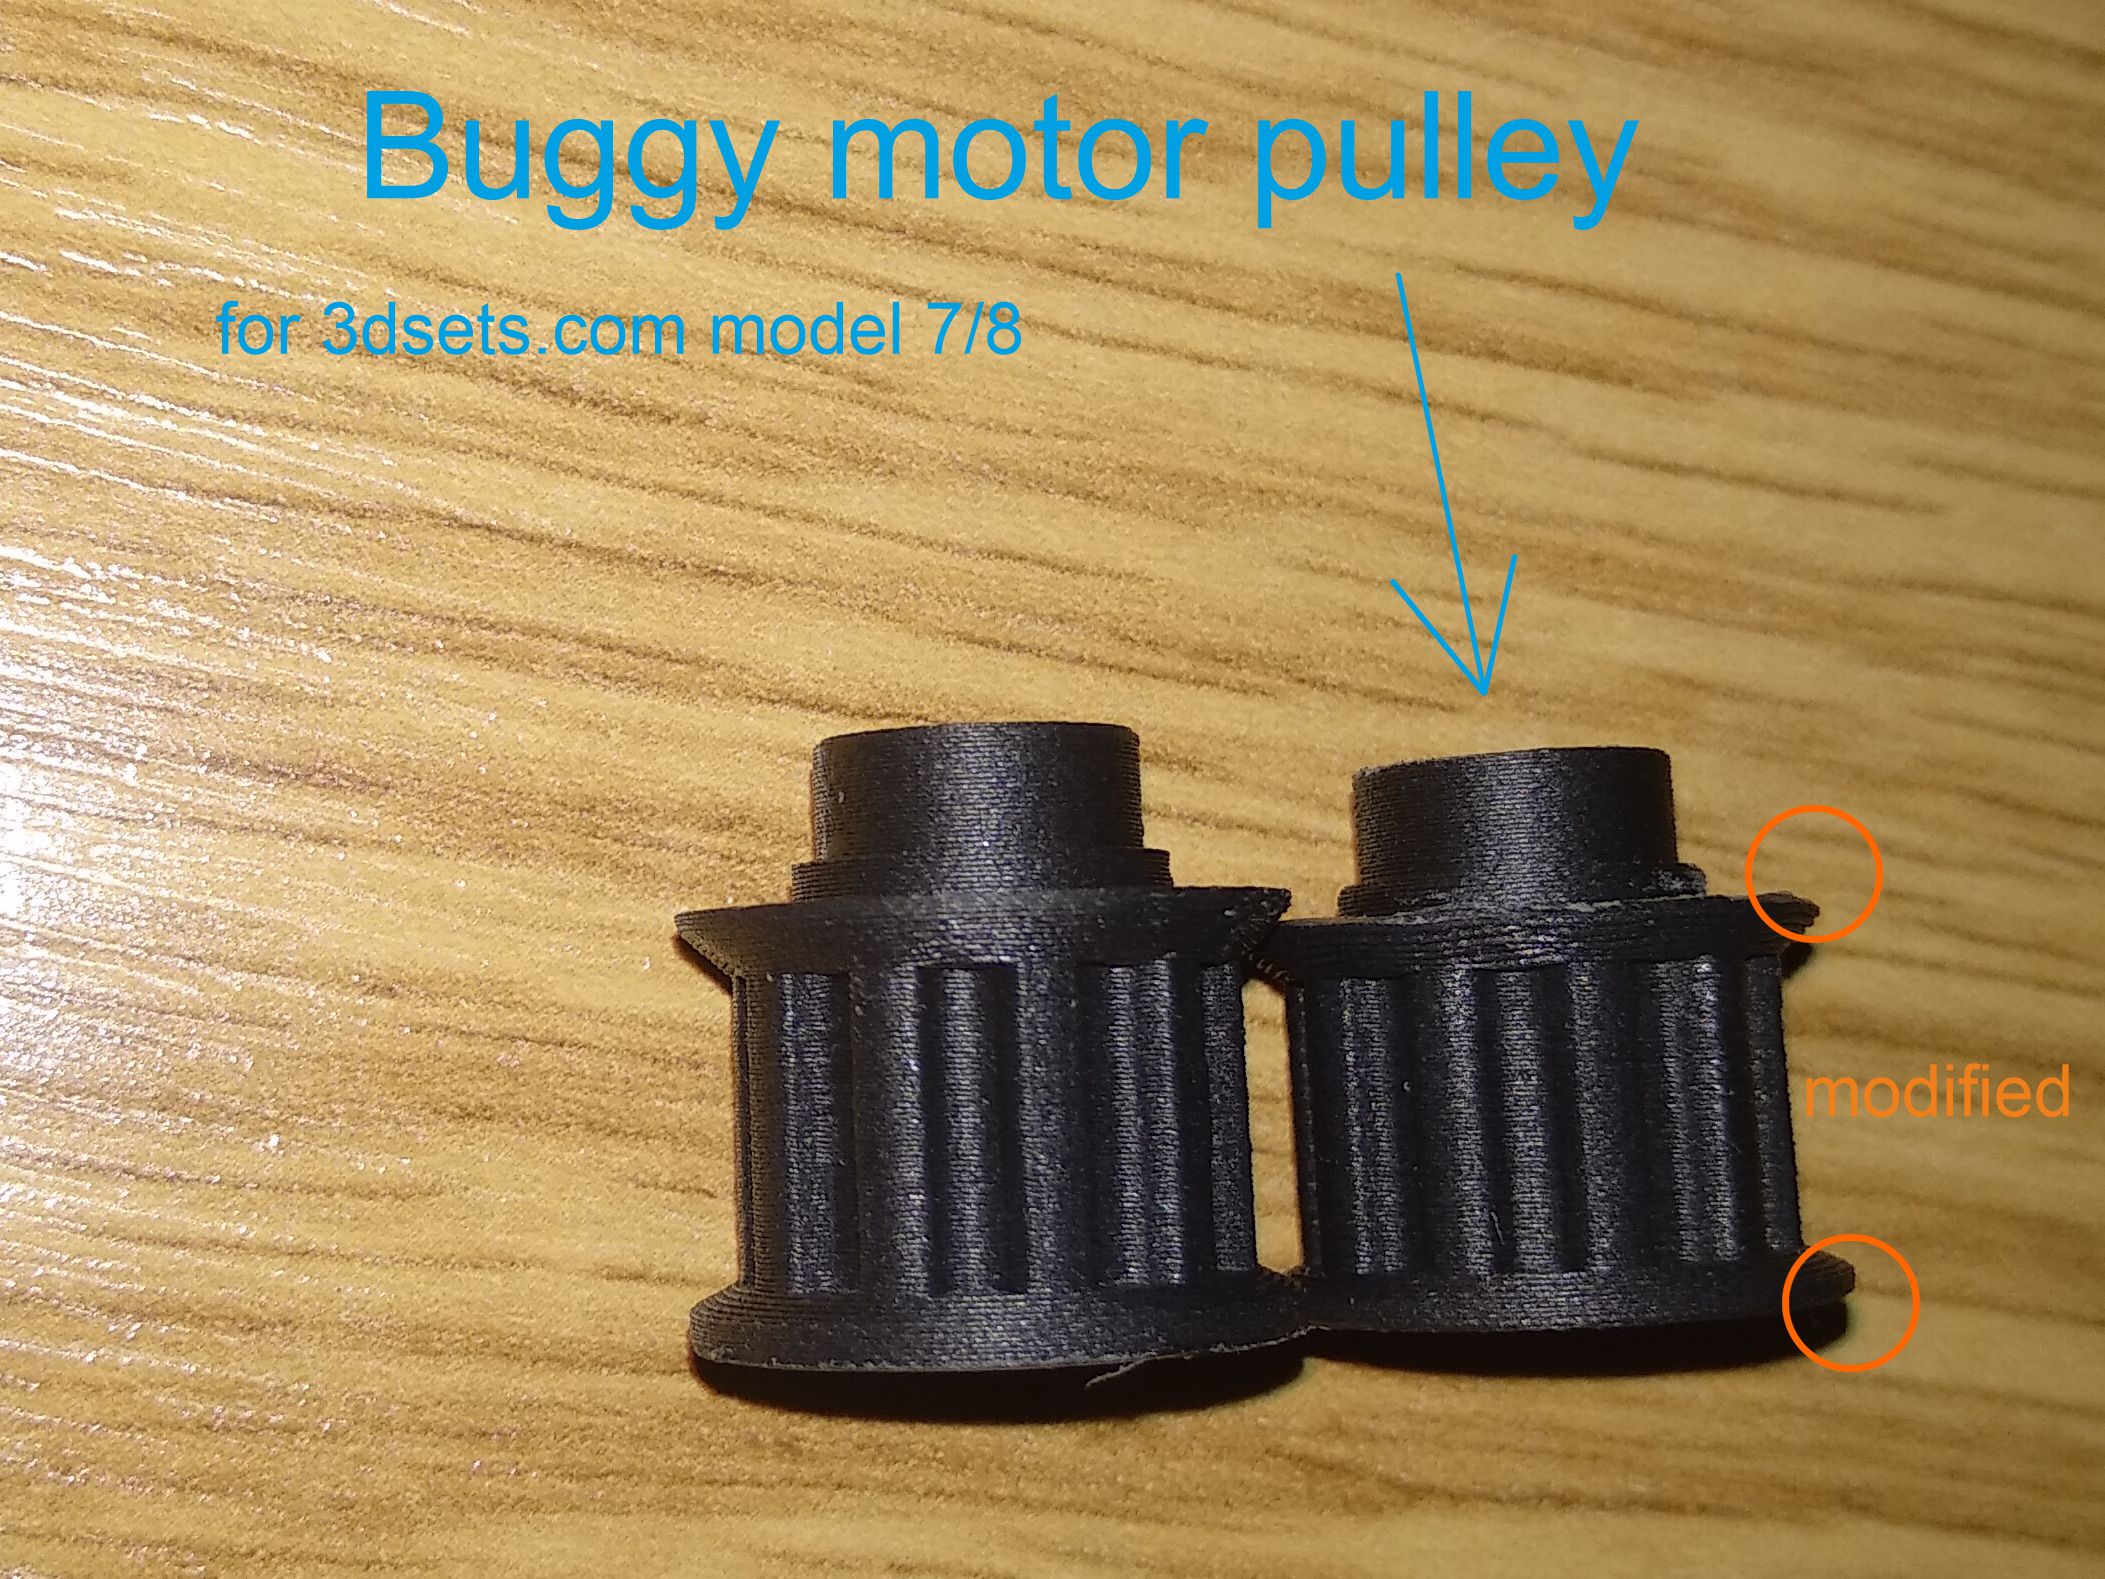 3d sets Buggy/Sandy modified pulley